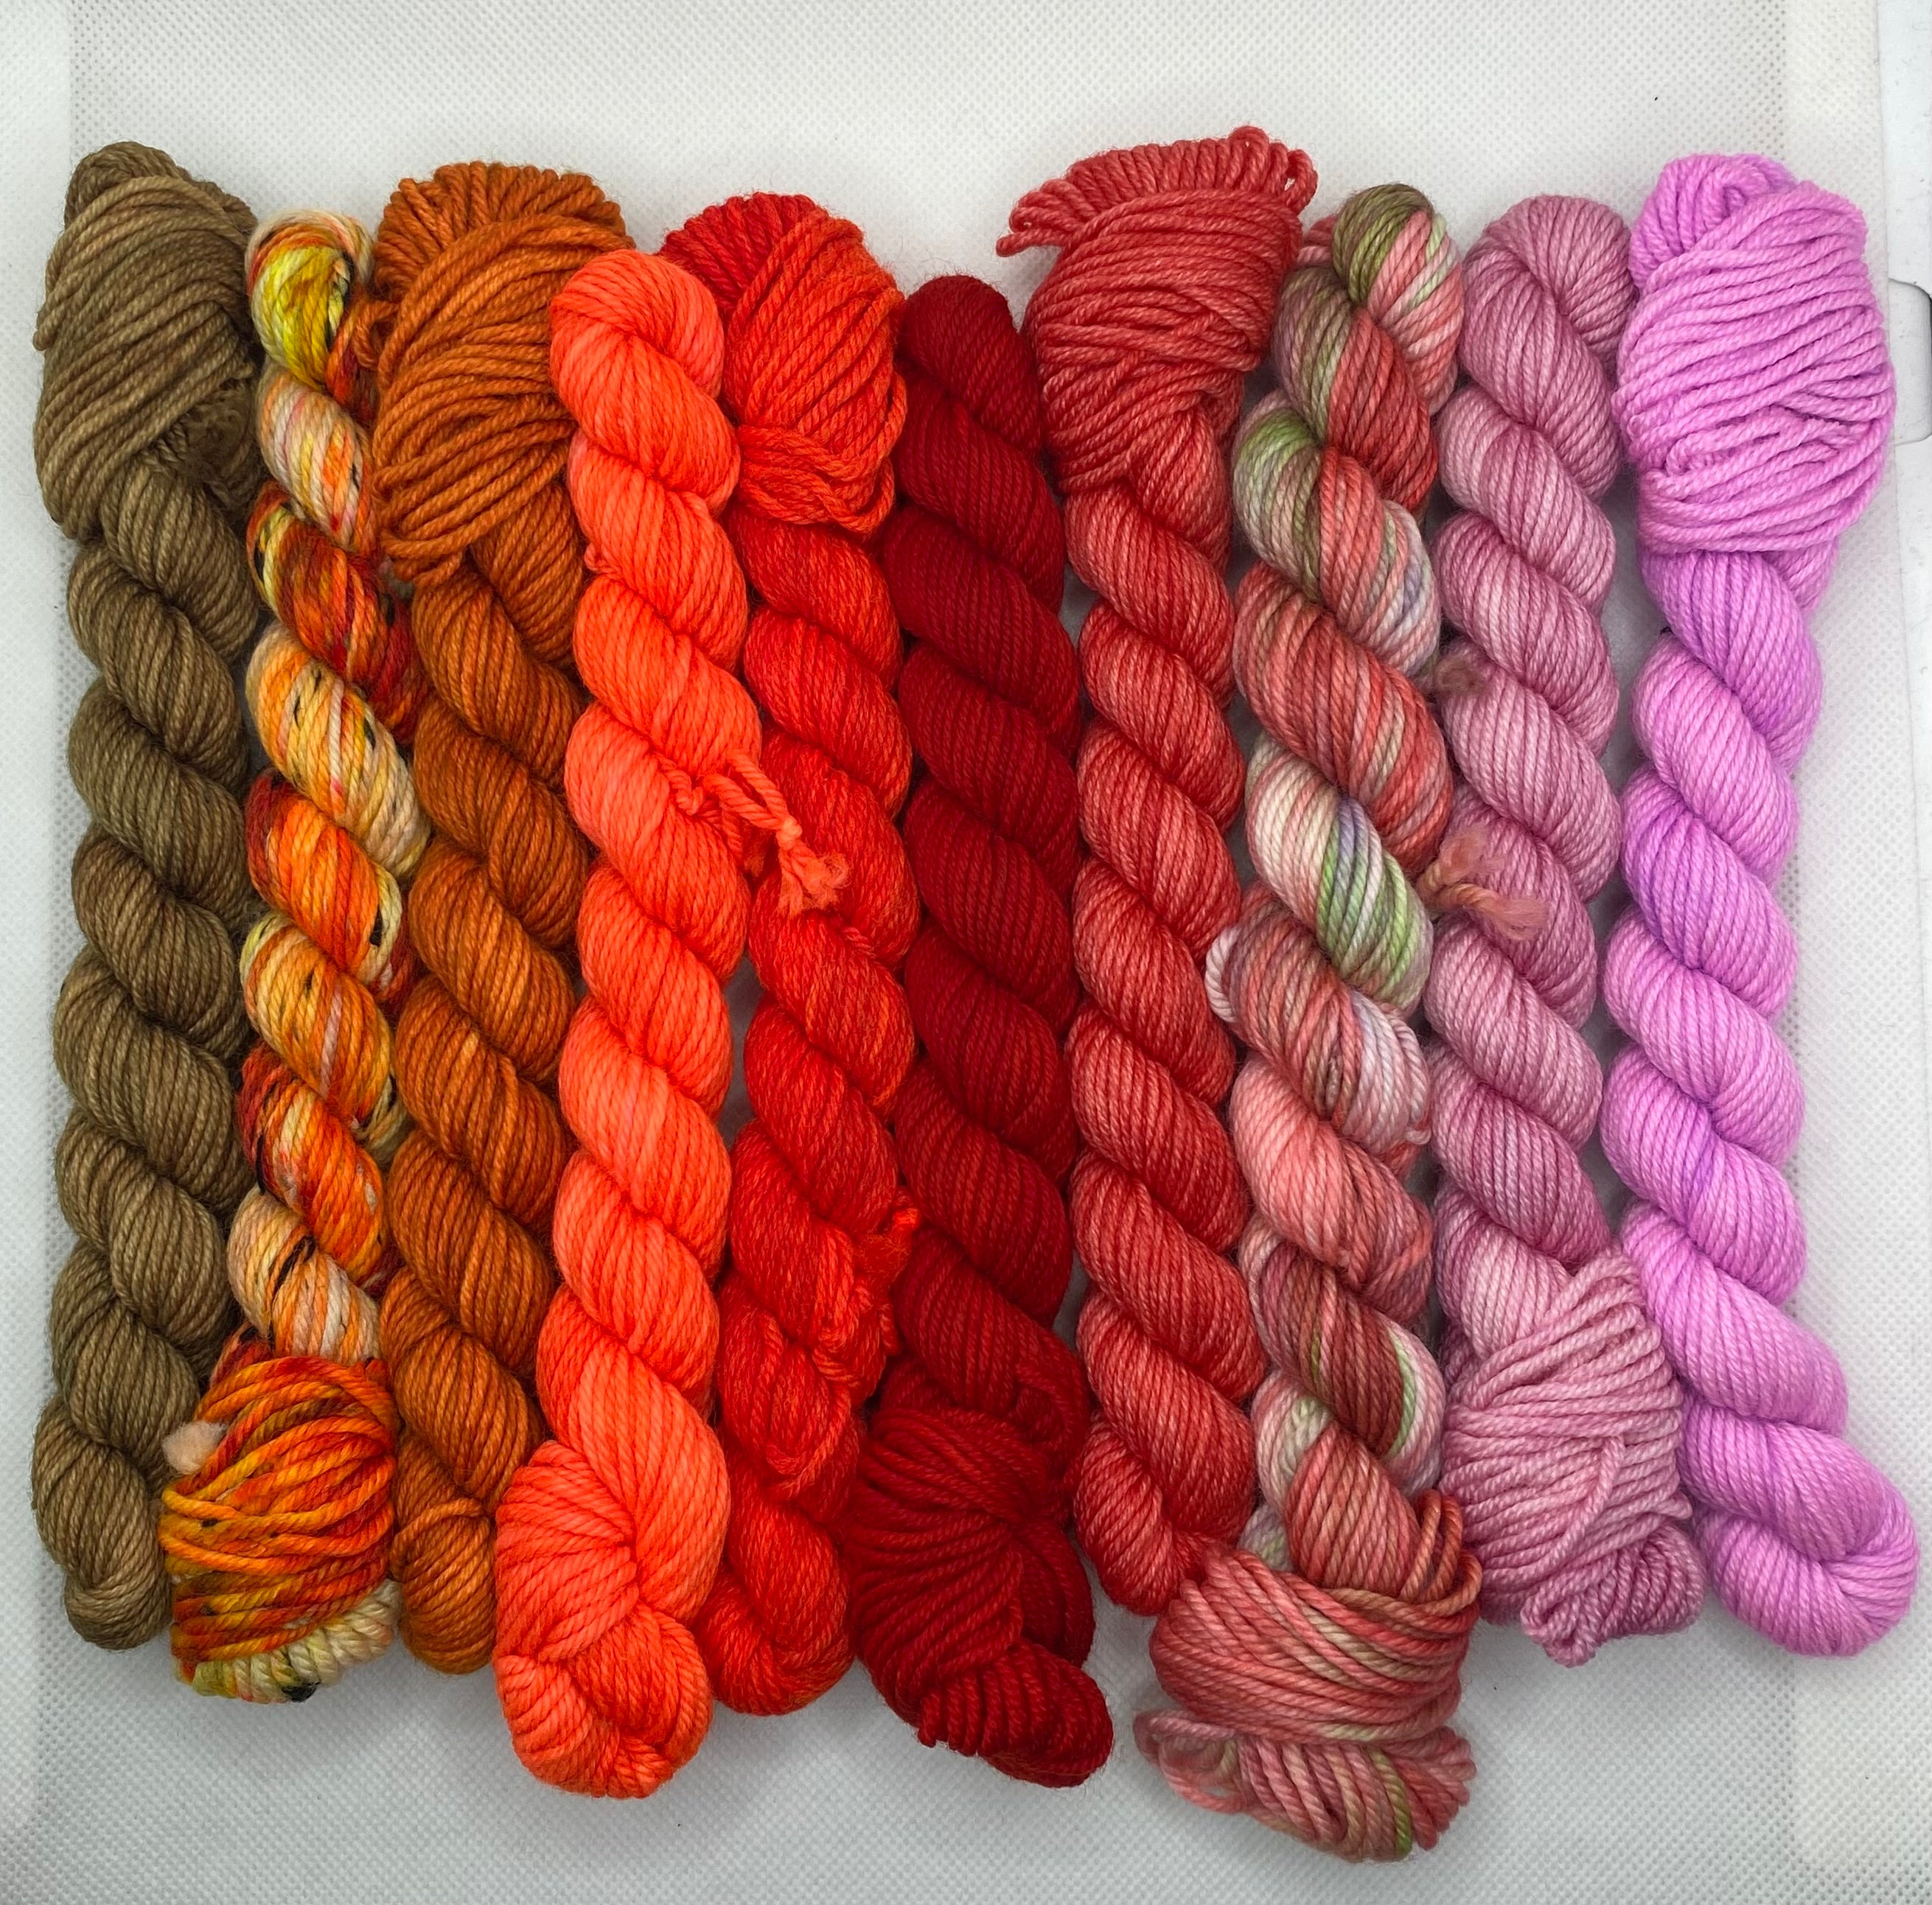 “Browns, Oranges, Reds and Pinks” DK Mini Skein Set of Hand Dyed Yarn